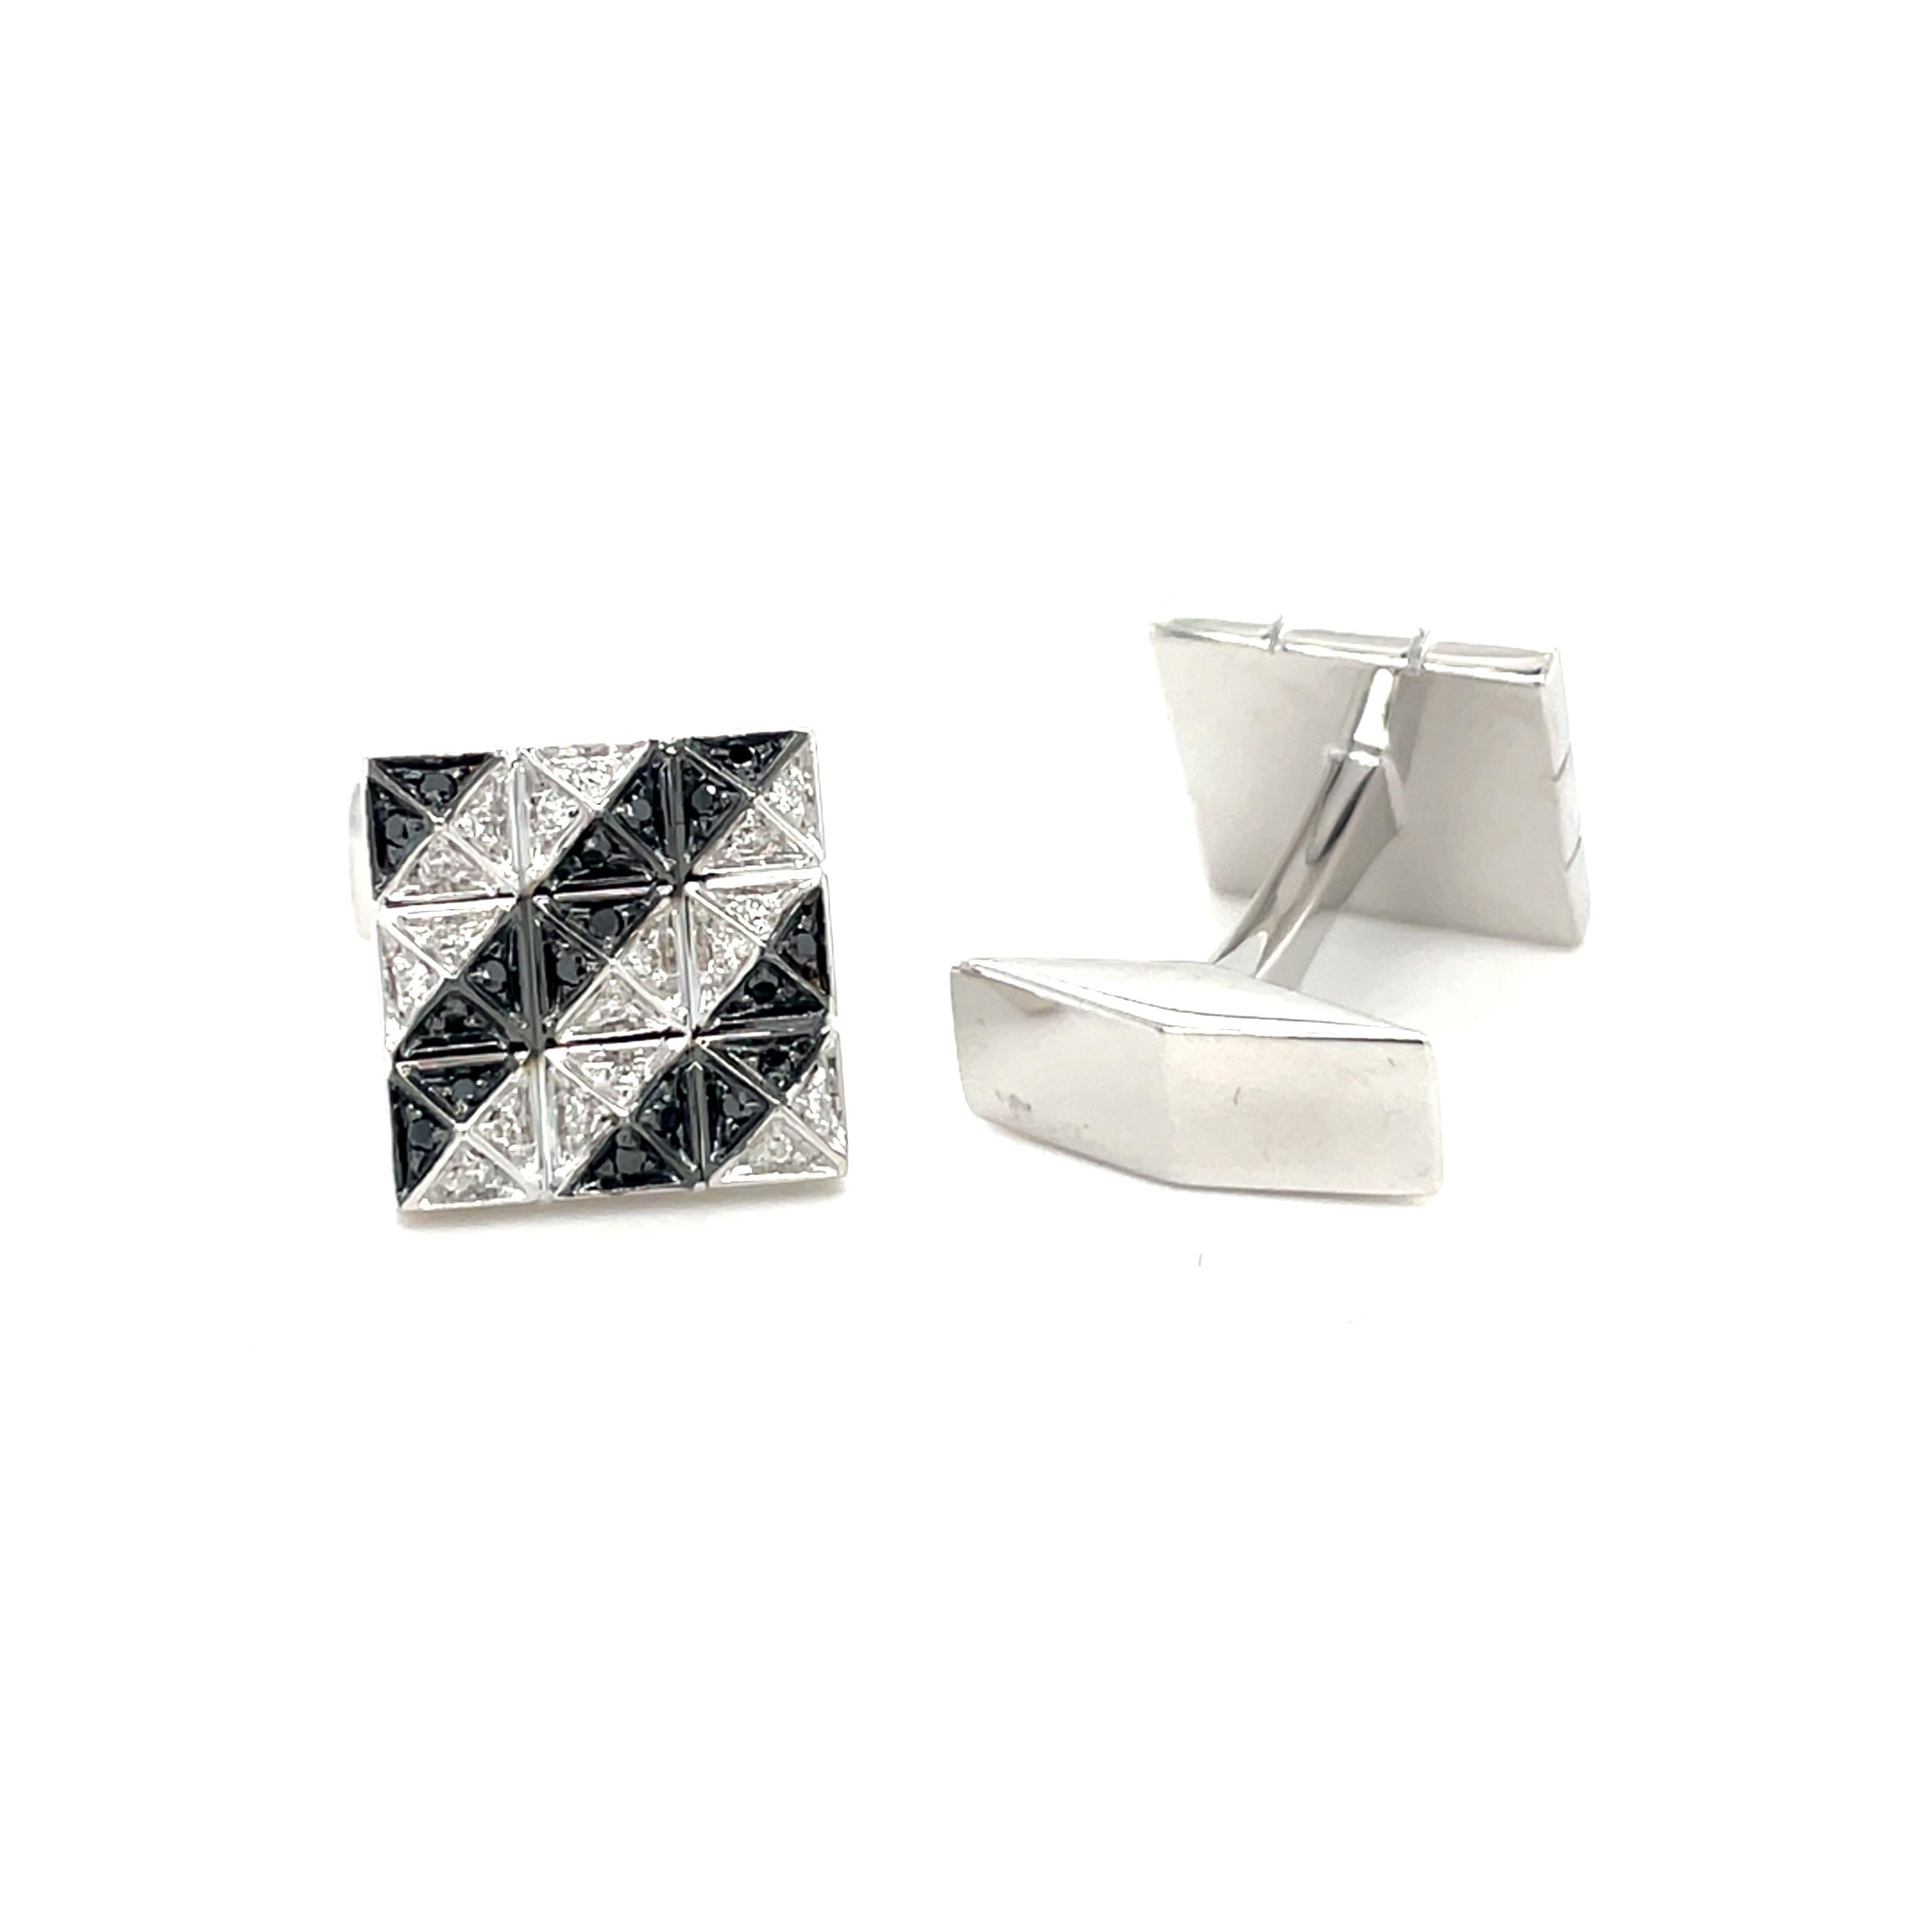 These 18K white gold unique cufflinks are from Timeless Collection. These very elegant cufflinks are made with white gold and black&white diamonds 0.47 Ct.  These cufflinks are a perfect upgrade to every look.
These stunning cufflinks feature a